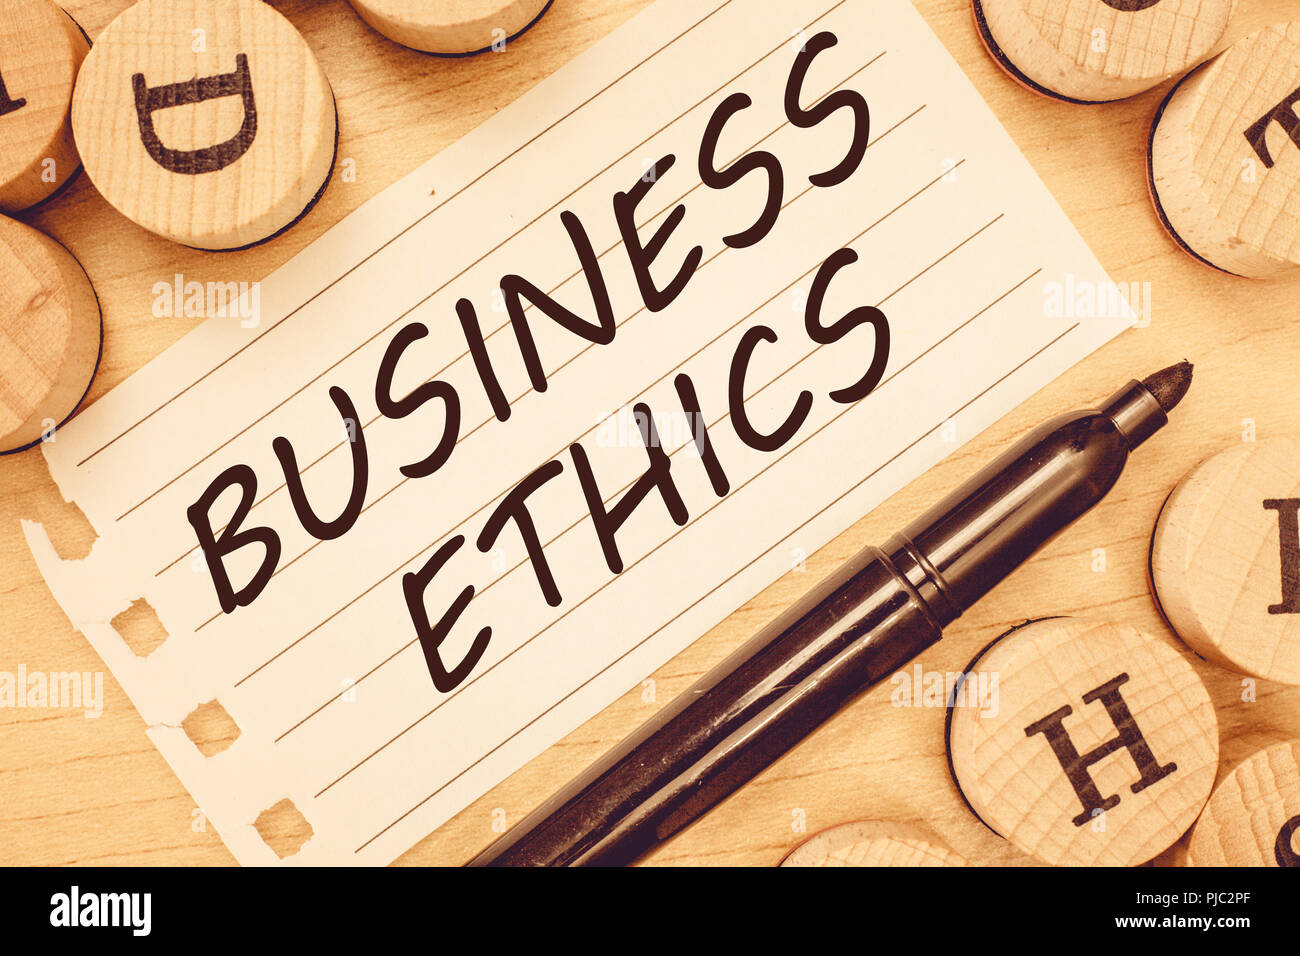 Word writing text Business Ethics. Business concept for Moral principles that guide the way a business behaves. Stock Photo